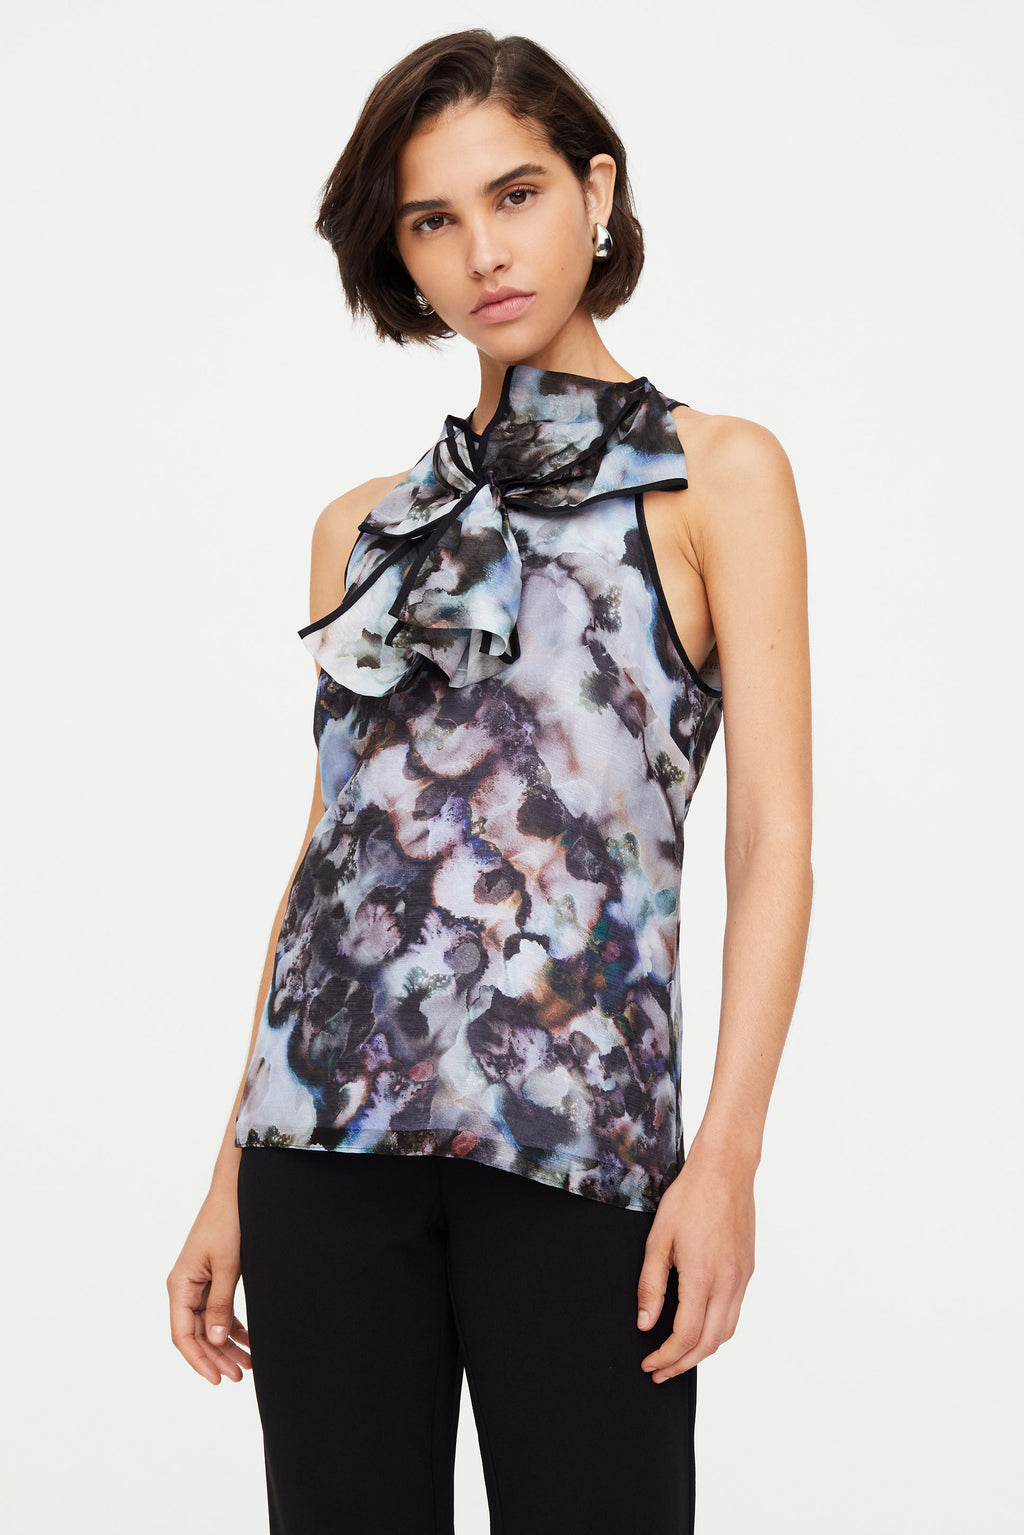 Sleeveless patterned top with bow in center 